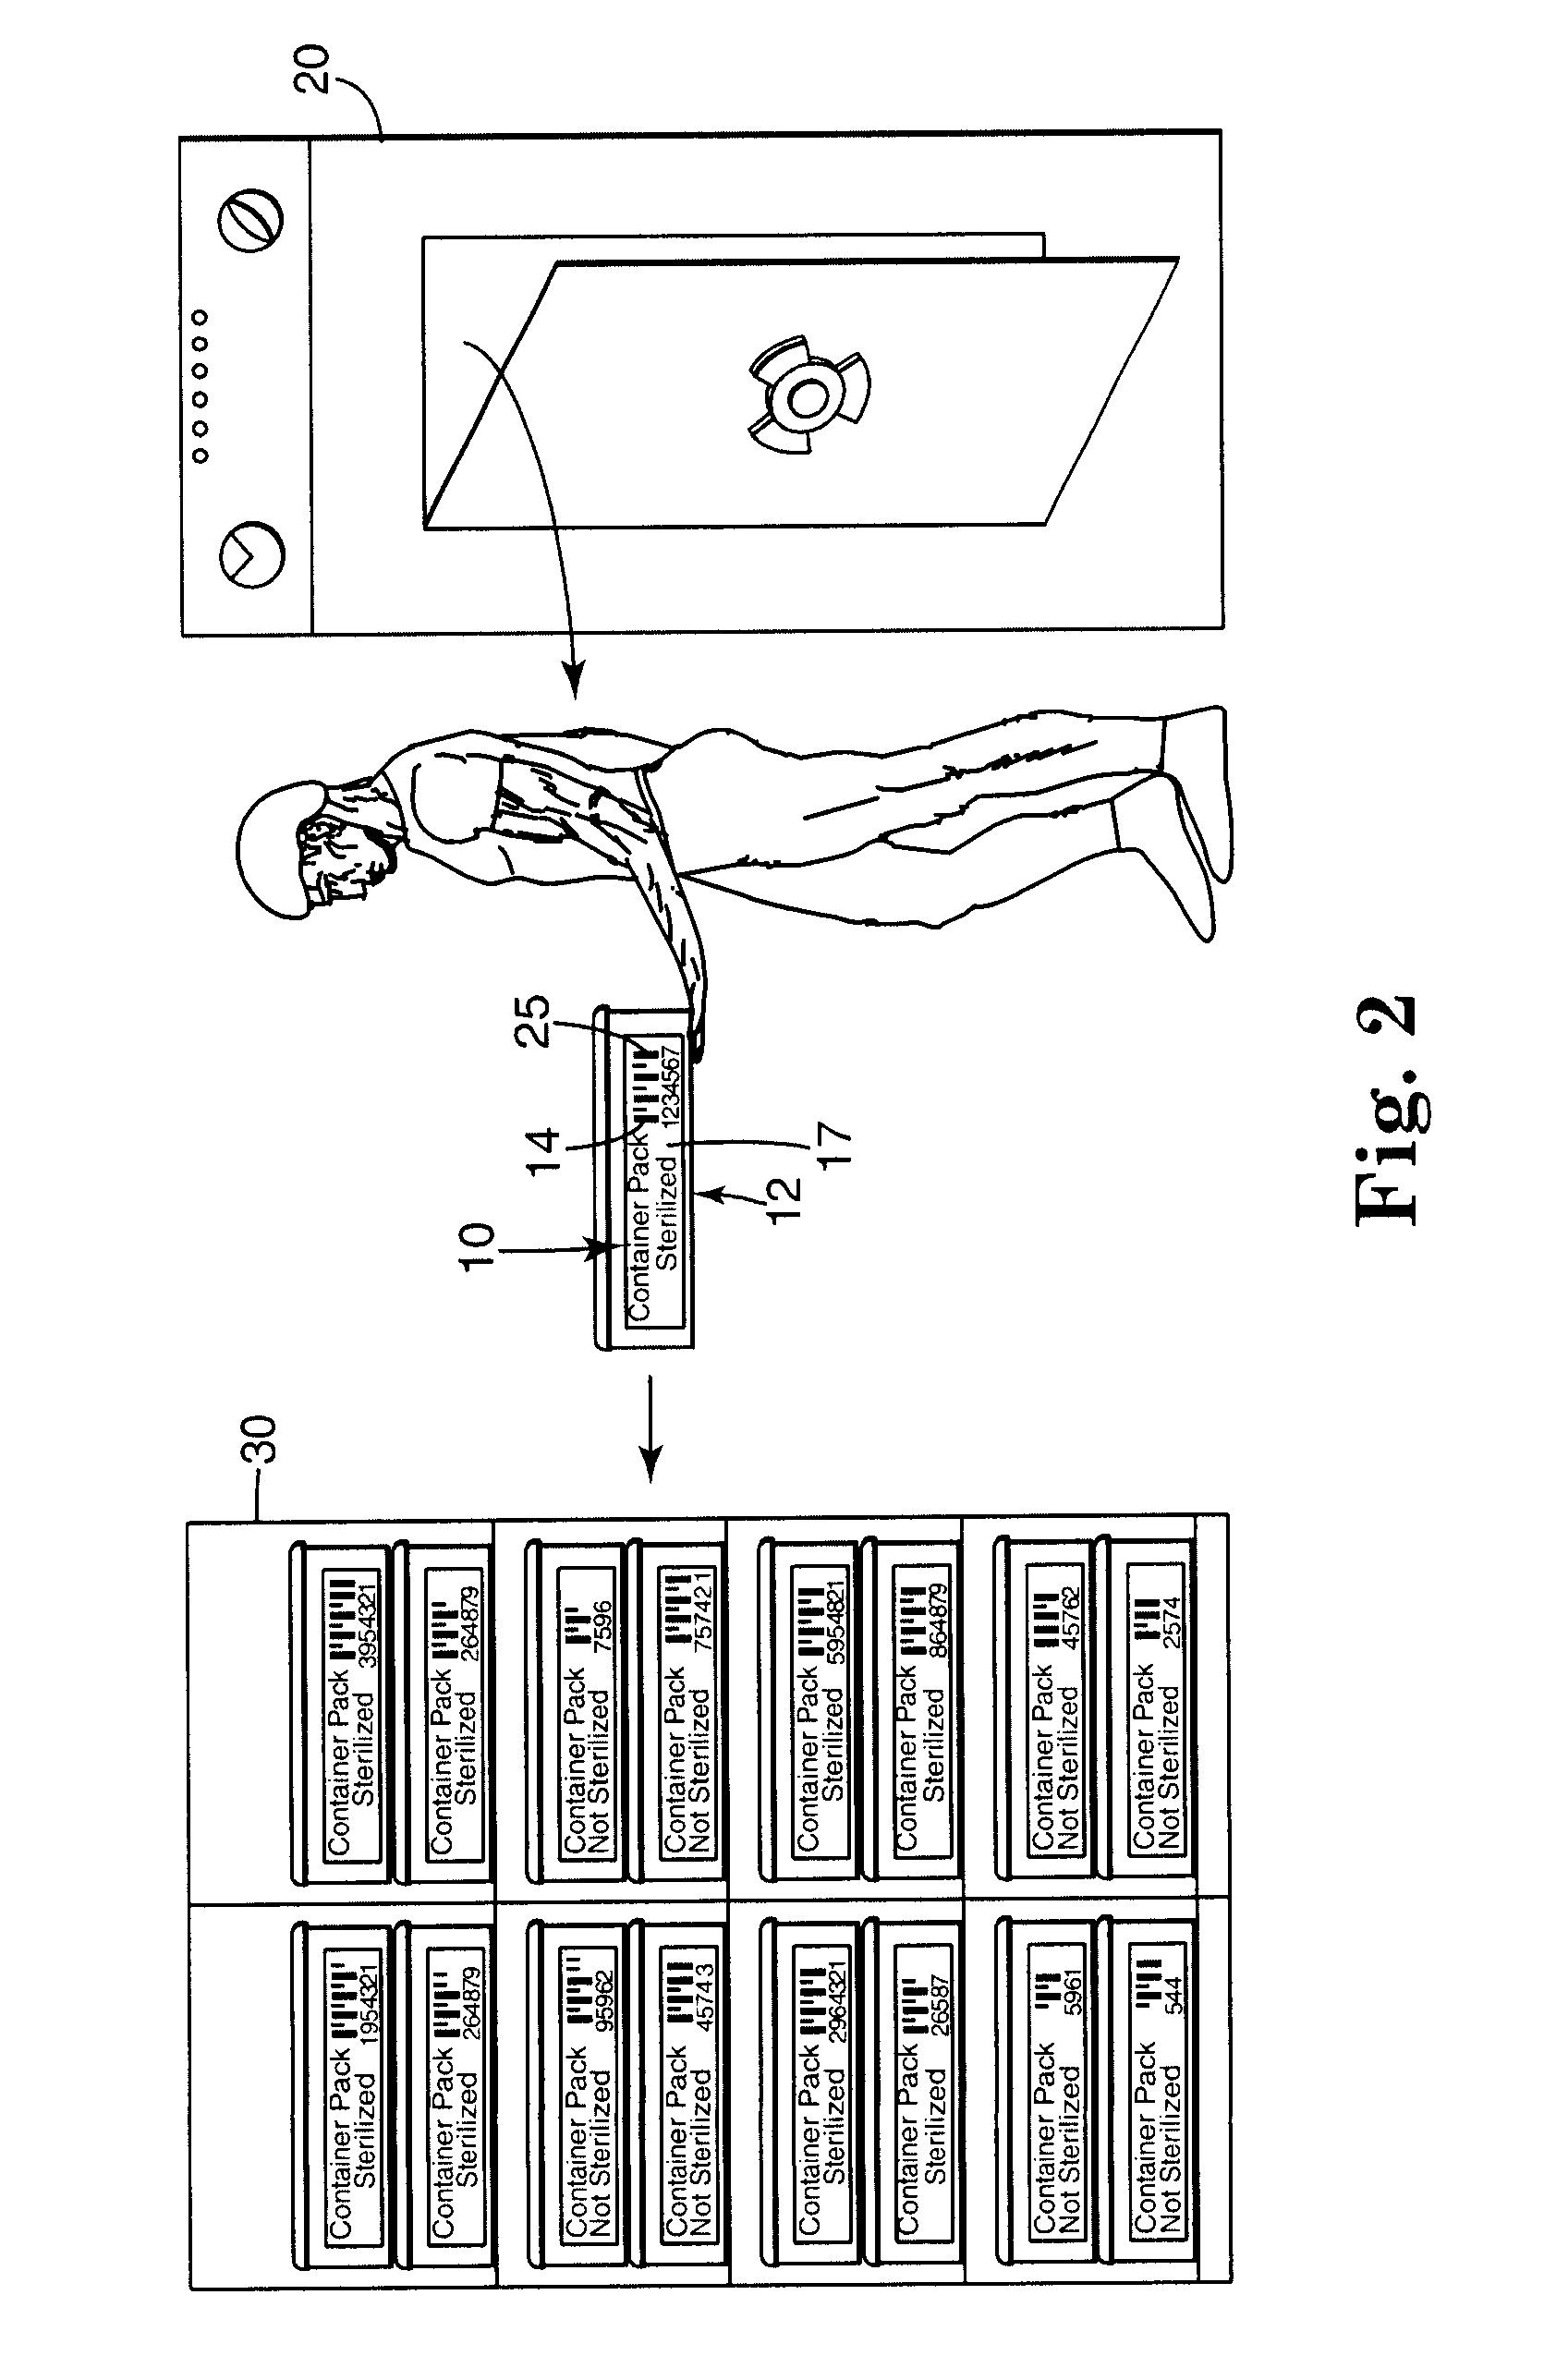 Electronic system for tracking and monitoring articles to be sterilized and associated method